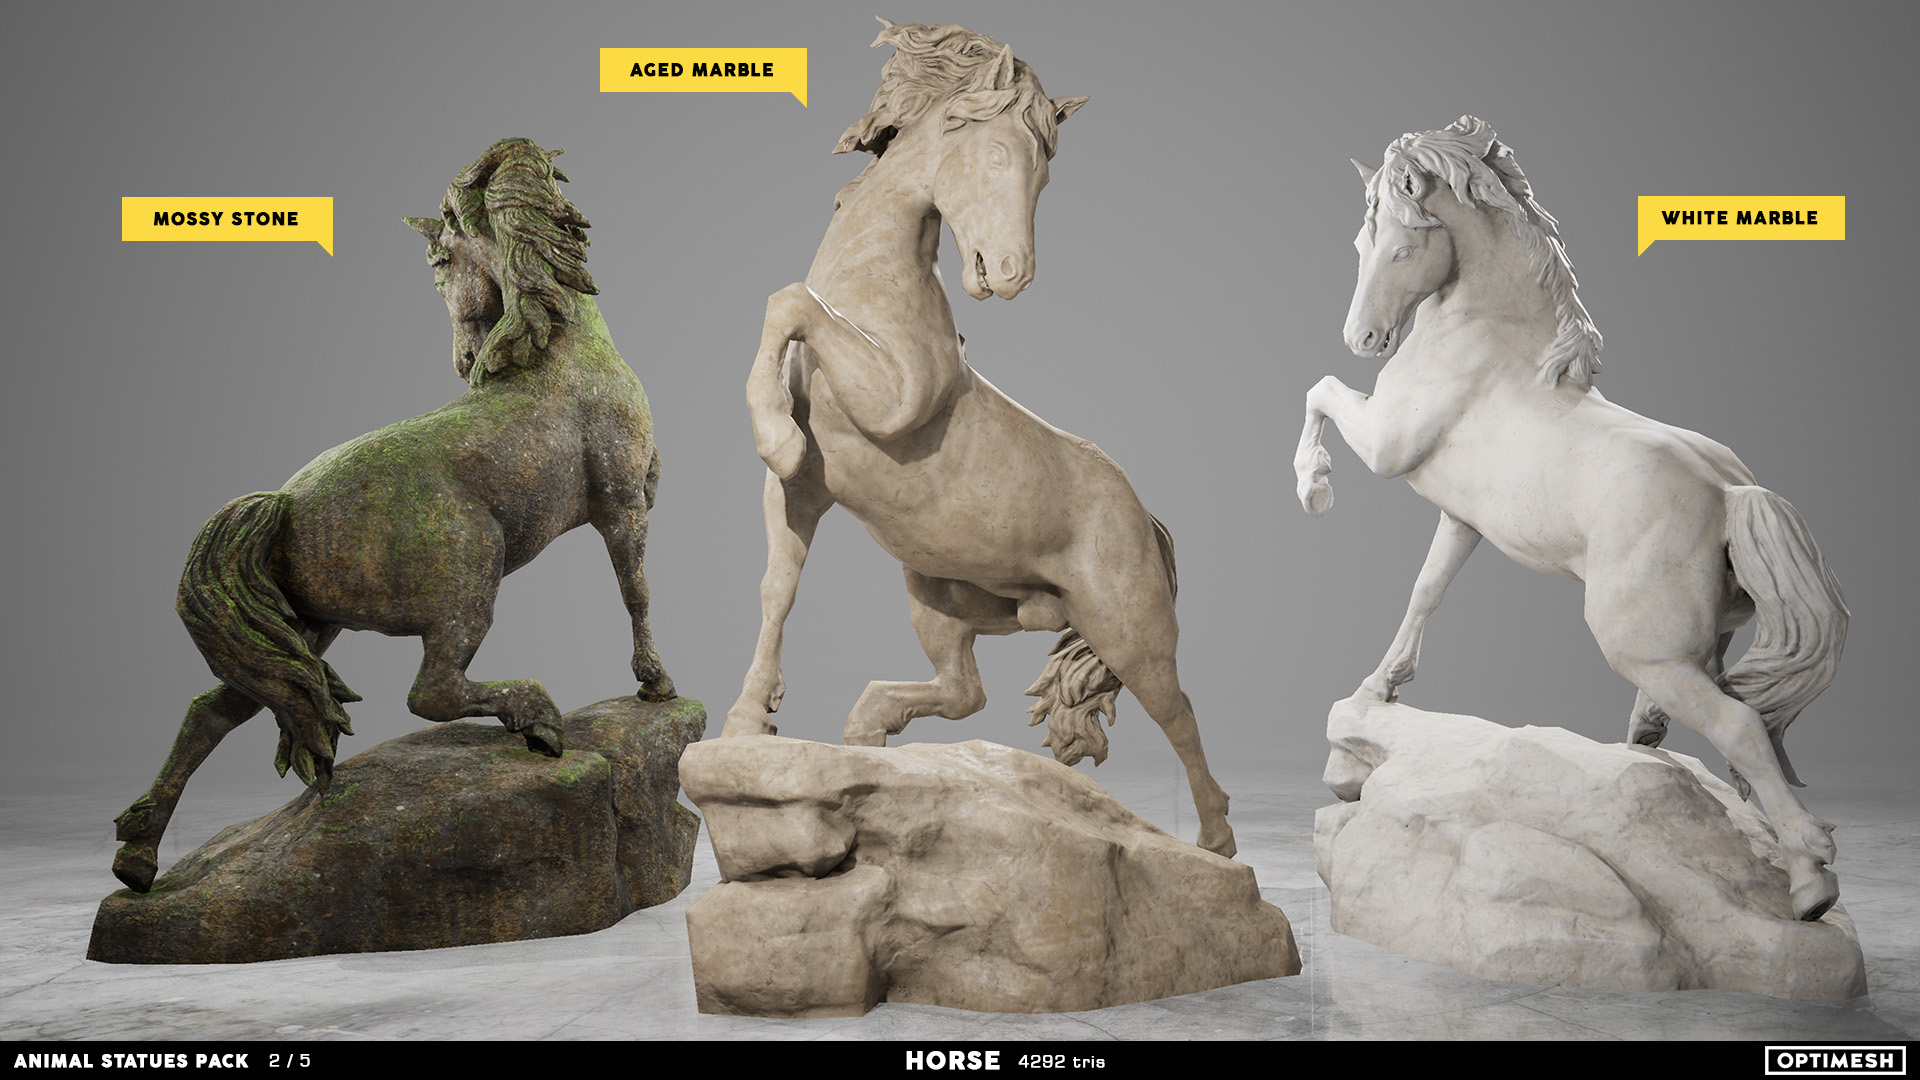 Animal Statues/Sculptures Pack by OPTIMESH in Props - UE4 Marketplace